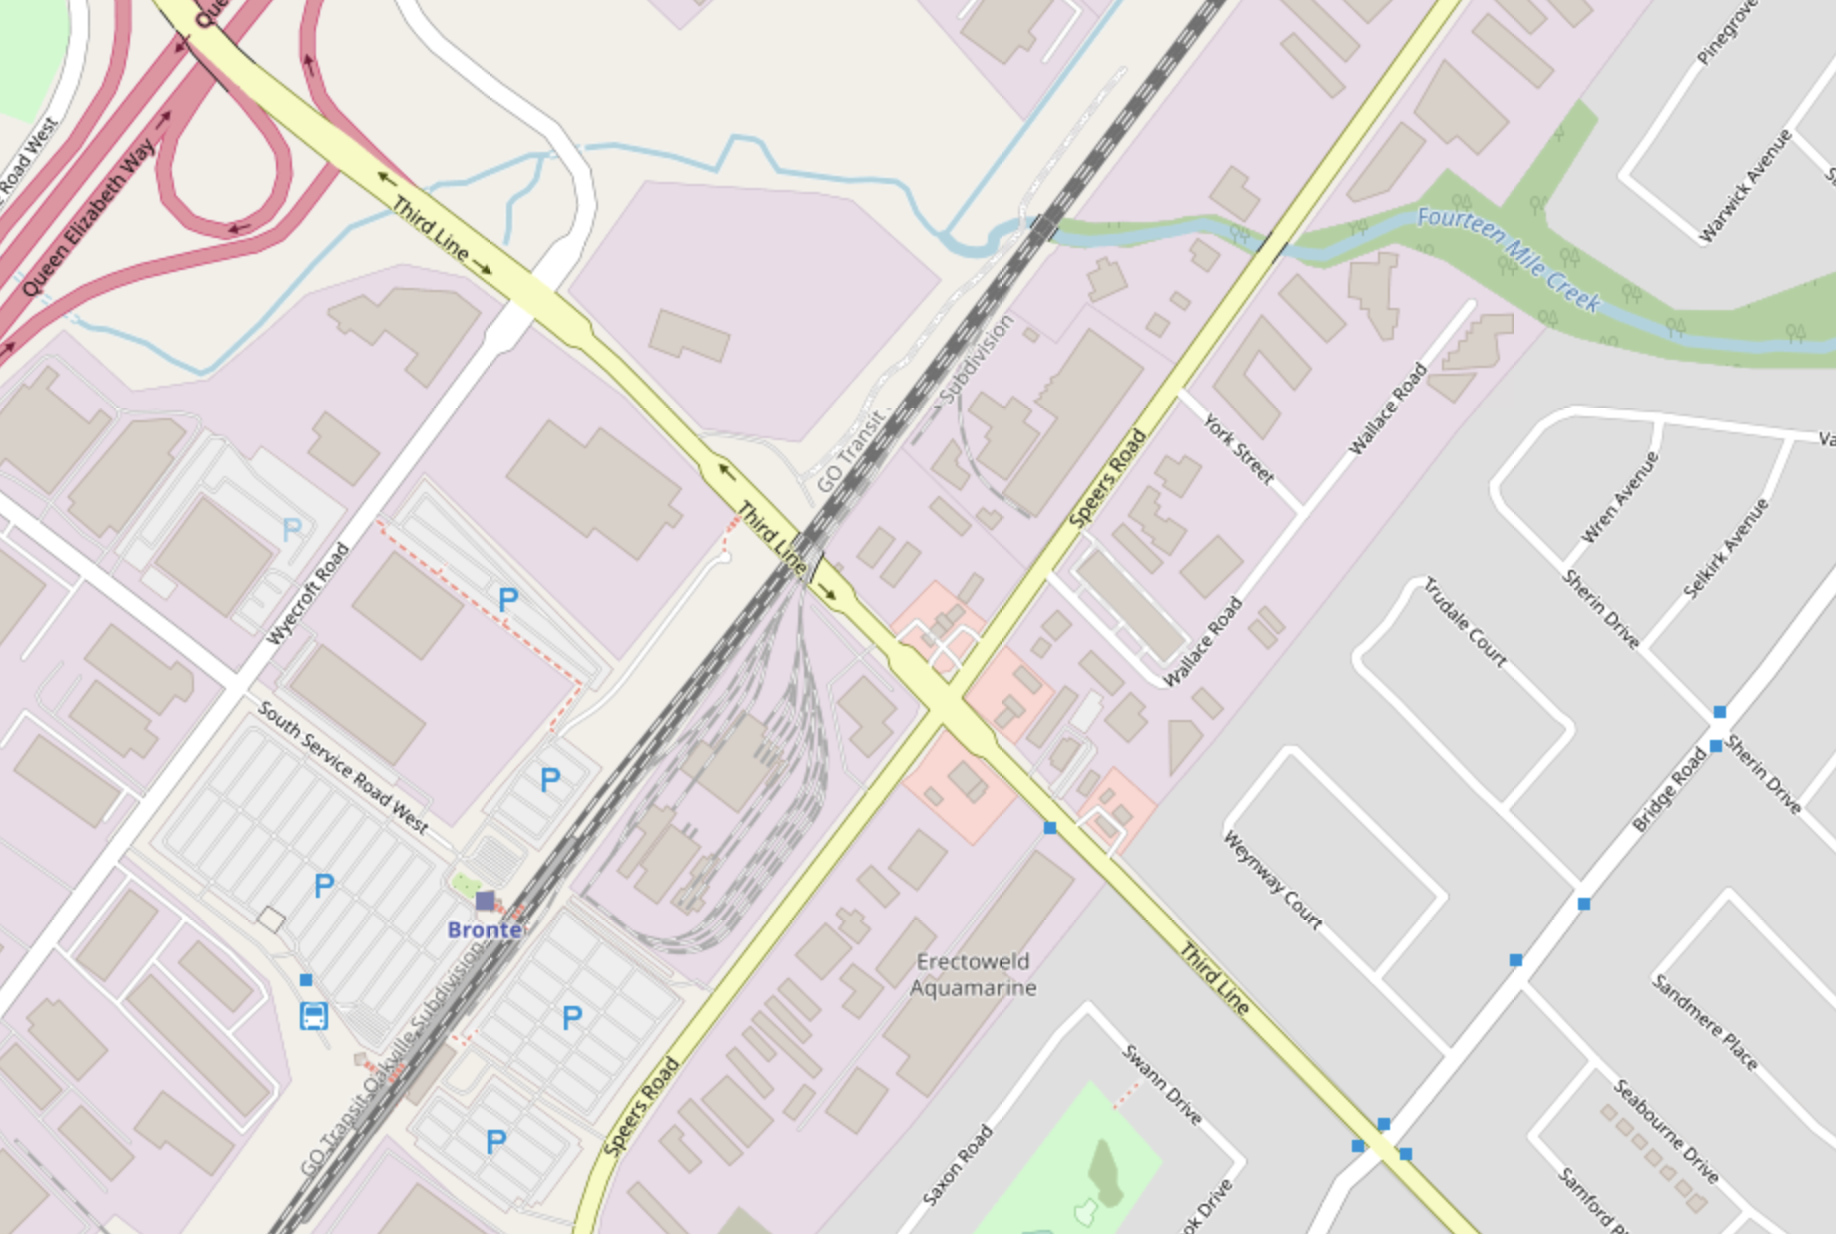 Third Line and Speers Road: the area of the residence | Openstreetmaps